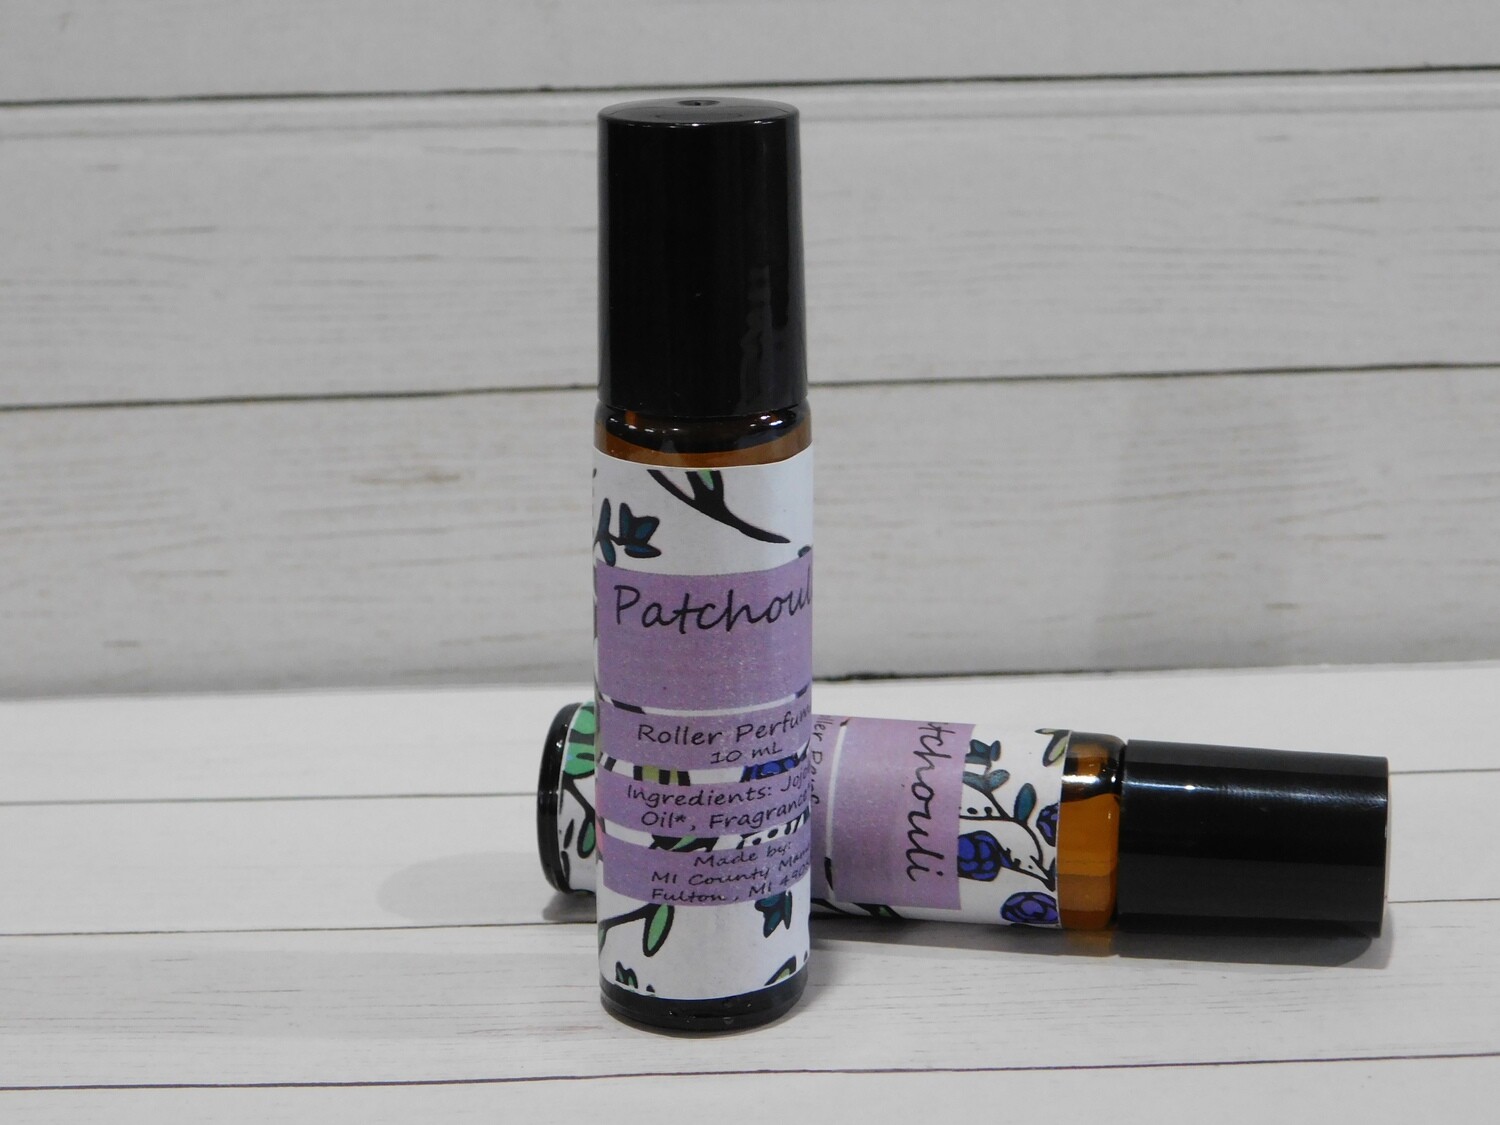 Patchouli Roller Perfume